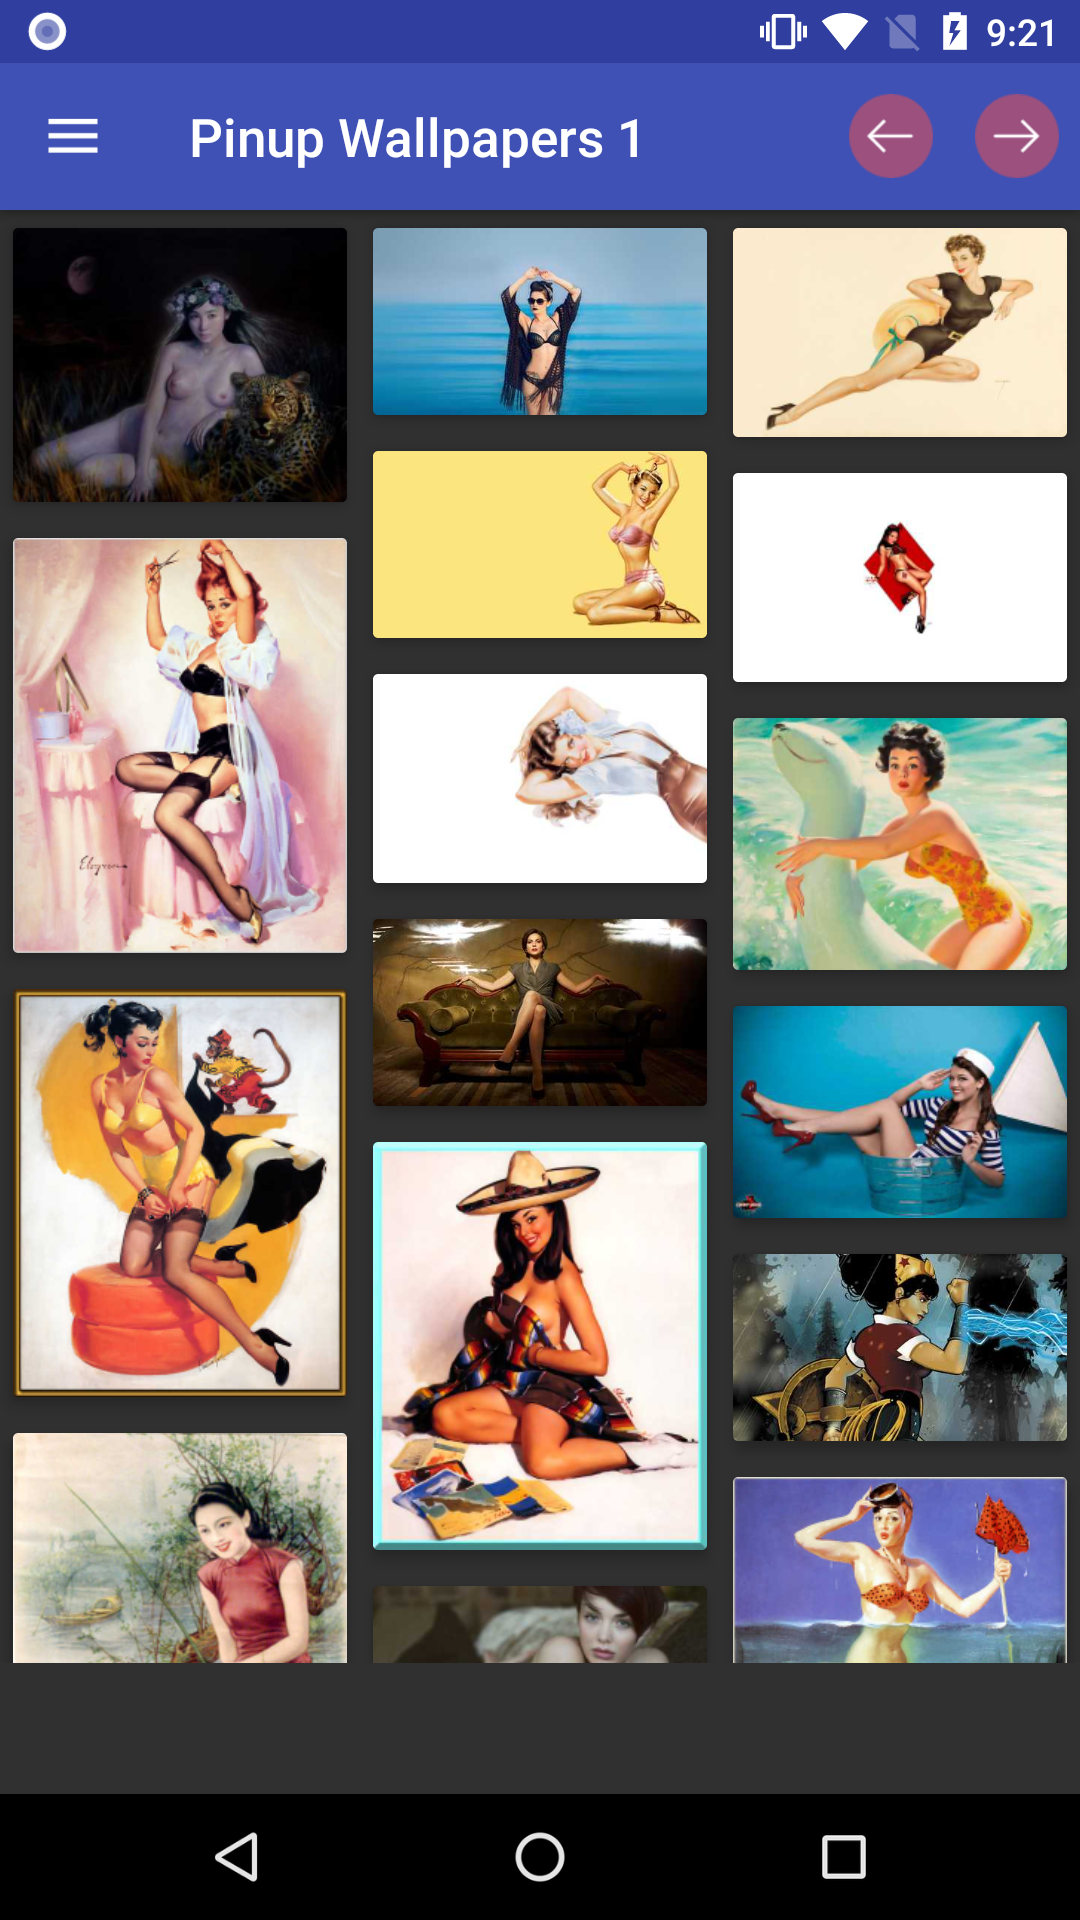 Pinup Wallpapers sexgalleries,application,hentay,for,pics,girls,backgrounds,apps,picture,pinup,apk,sexy,android,porn,download,pictures,wallpapers,gay,photos,baixar,hentai,star,gallery,app